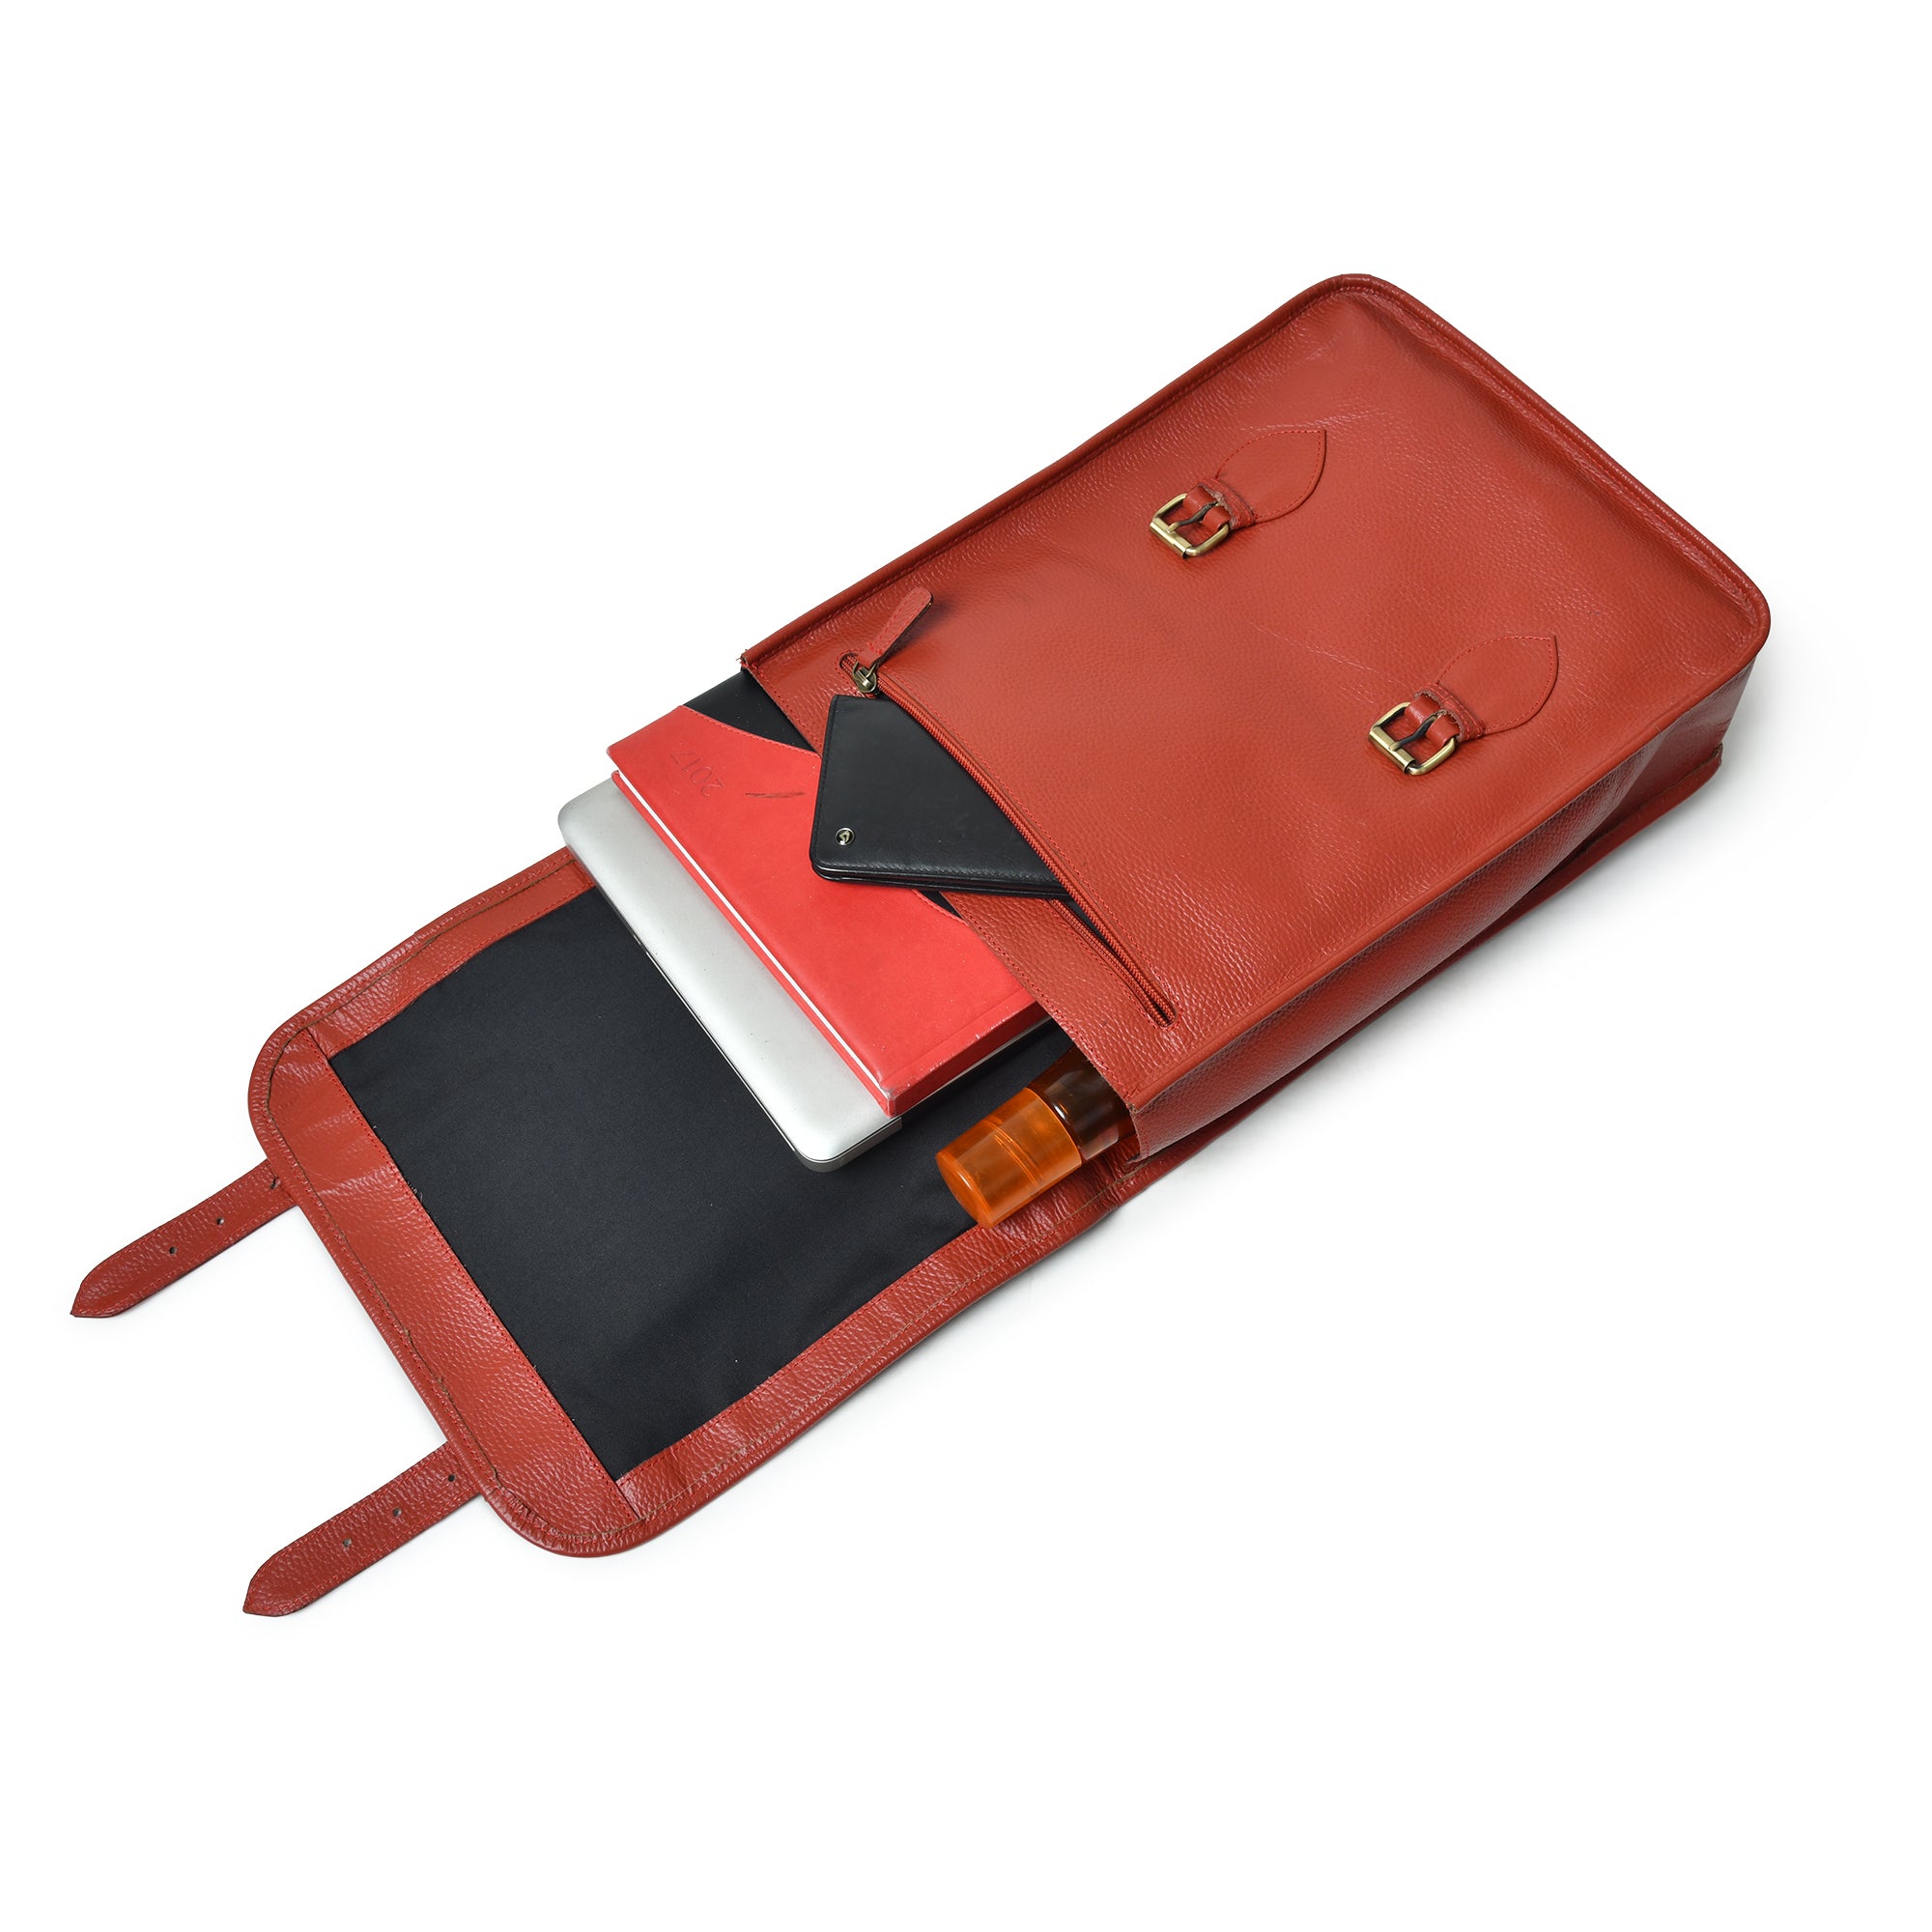 Penny Leather Backpack- Red - DÖTCH CLUB